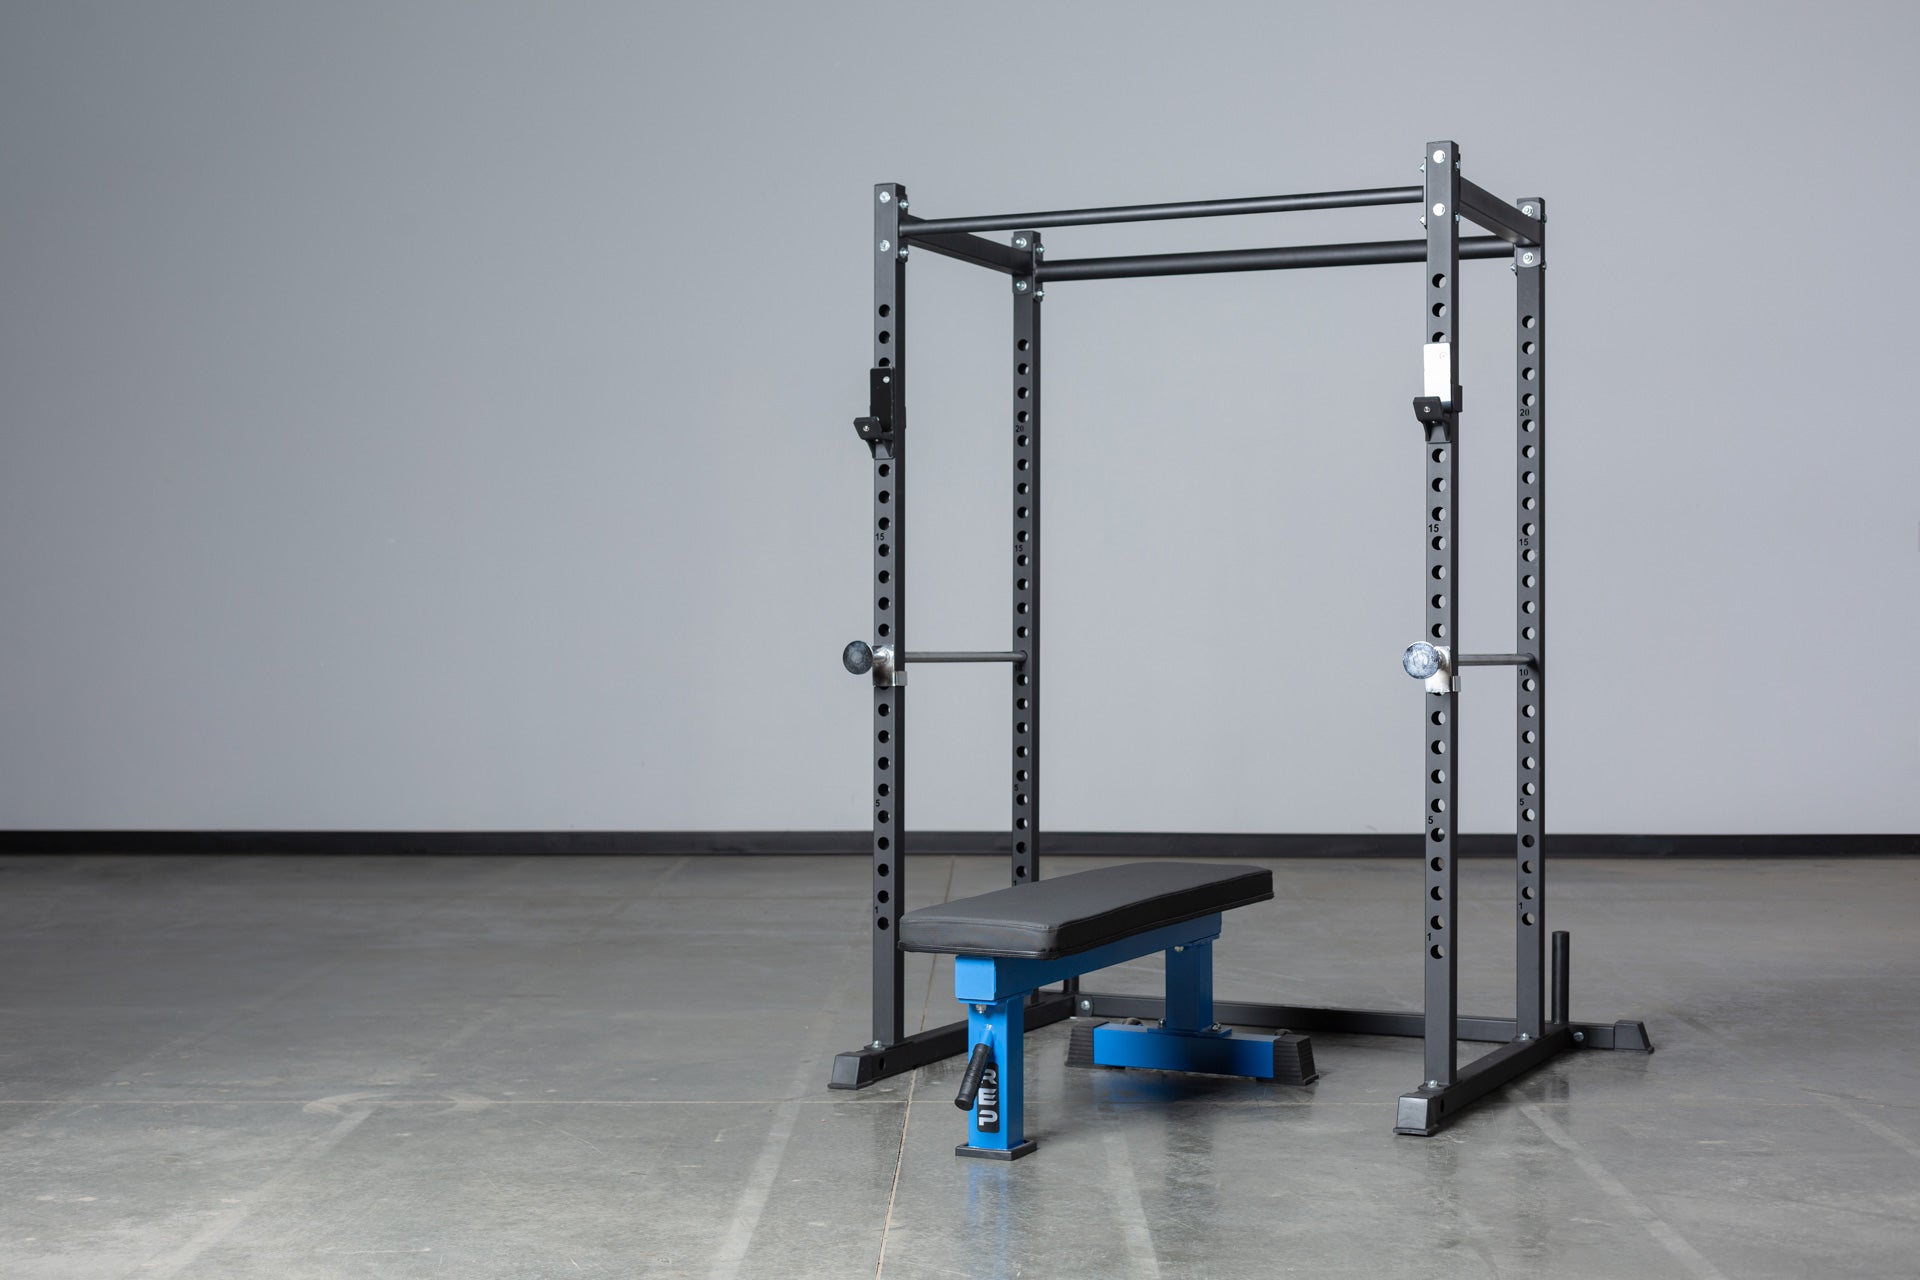 PR-1050 Short Power Rack Pictured With a Flat Bench